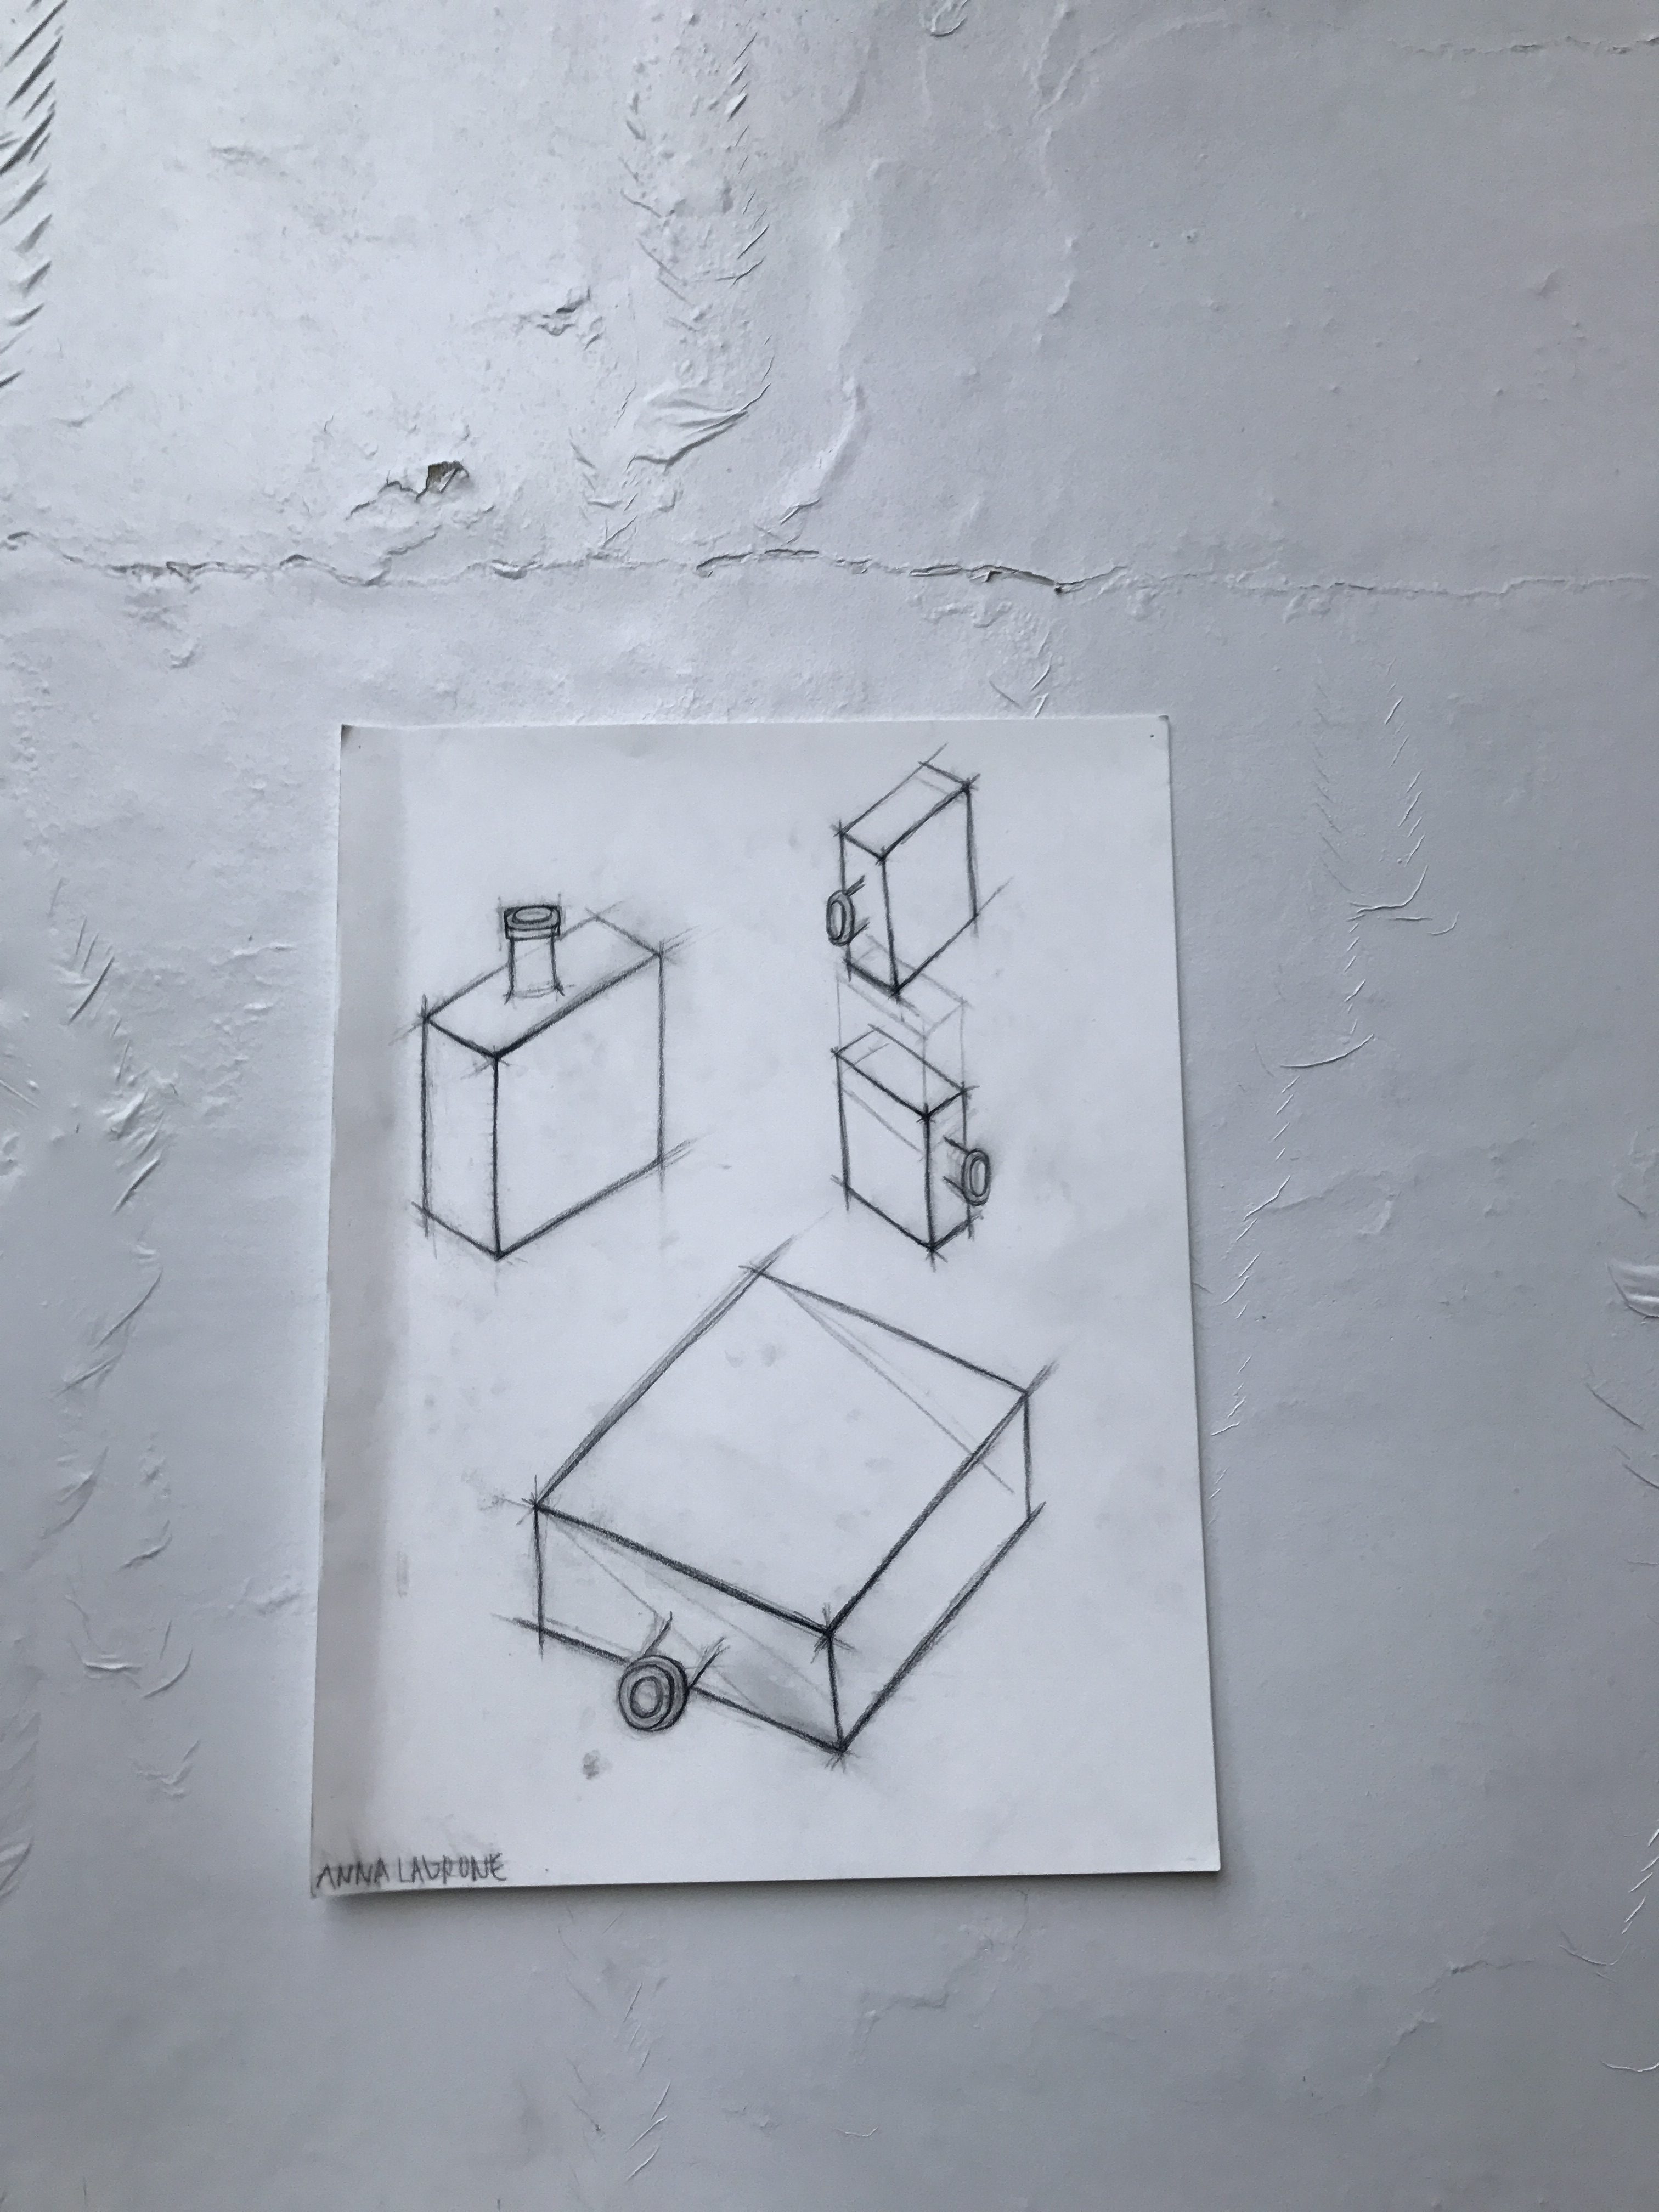 Drawing/Imaging – three “repeated object” drawing